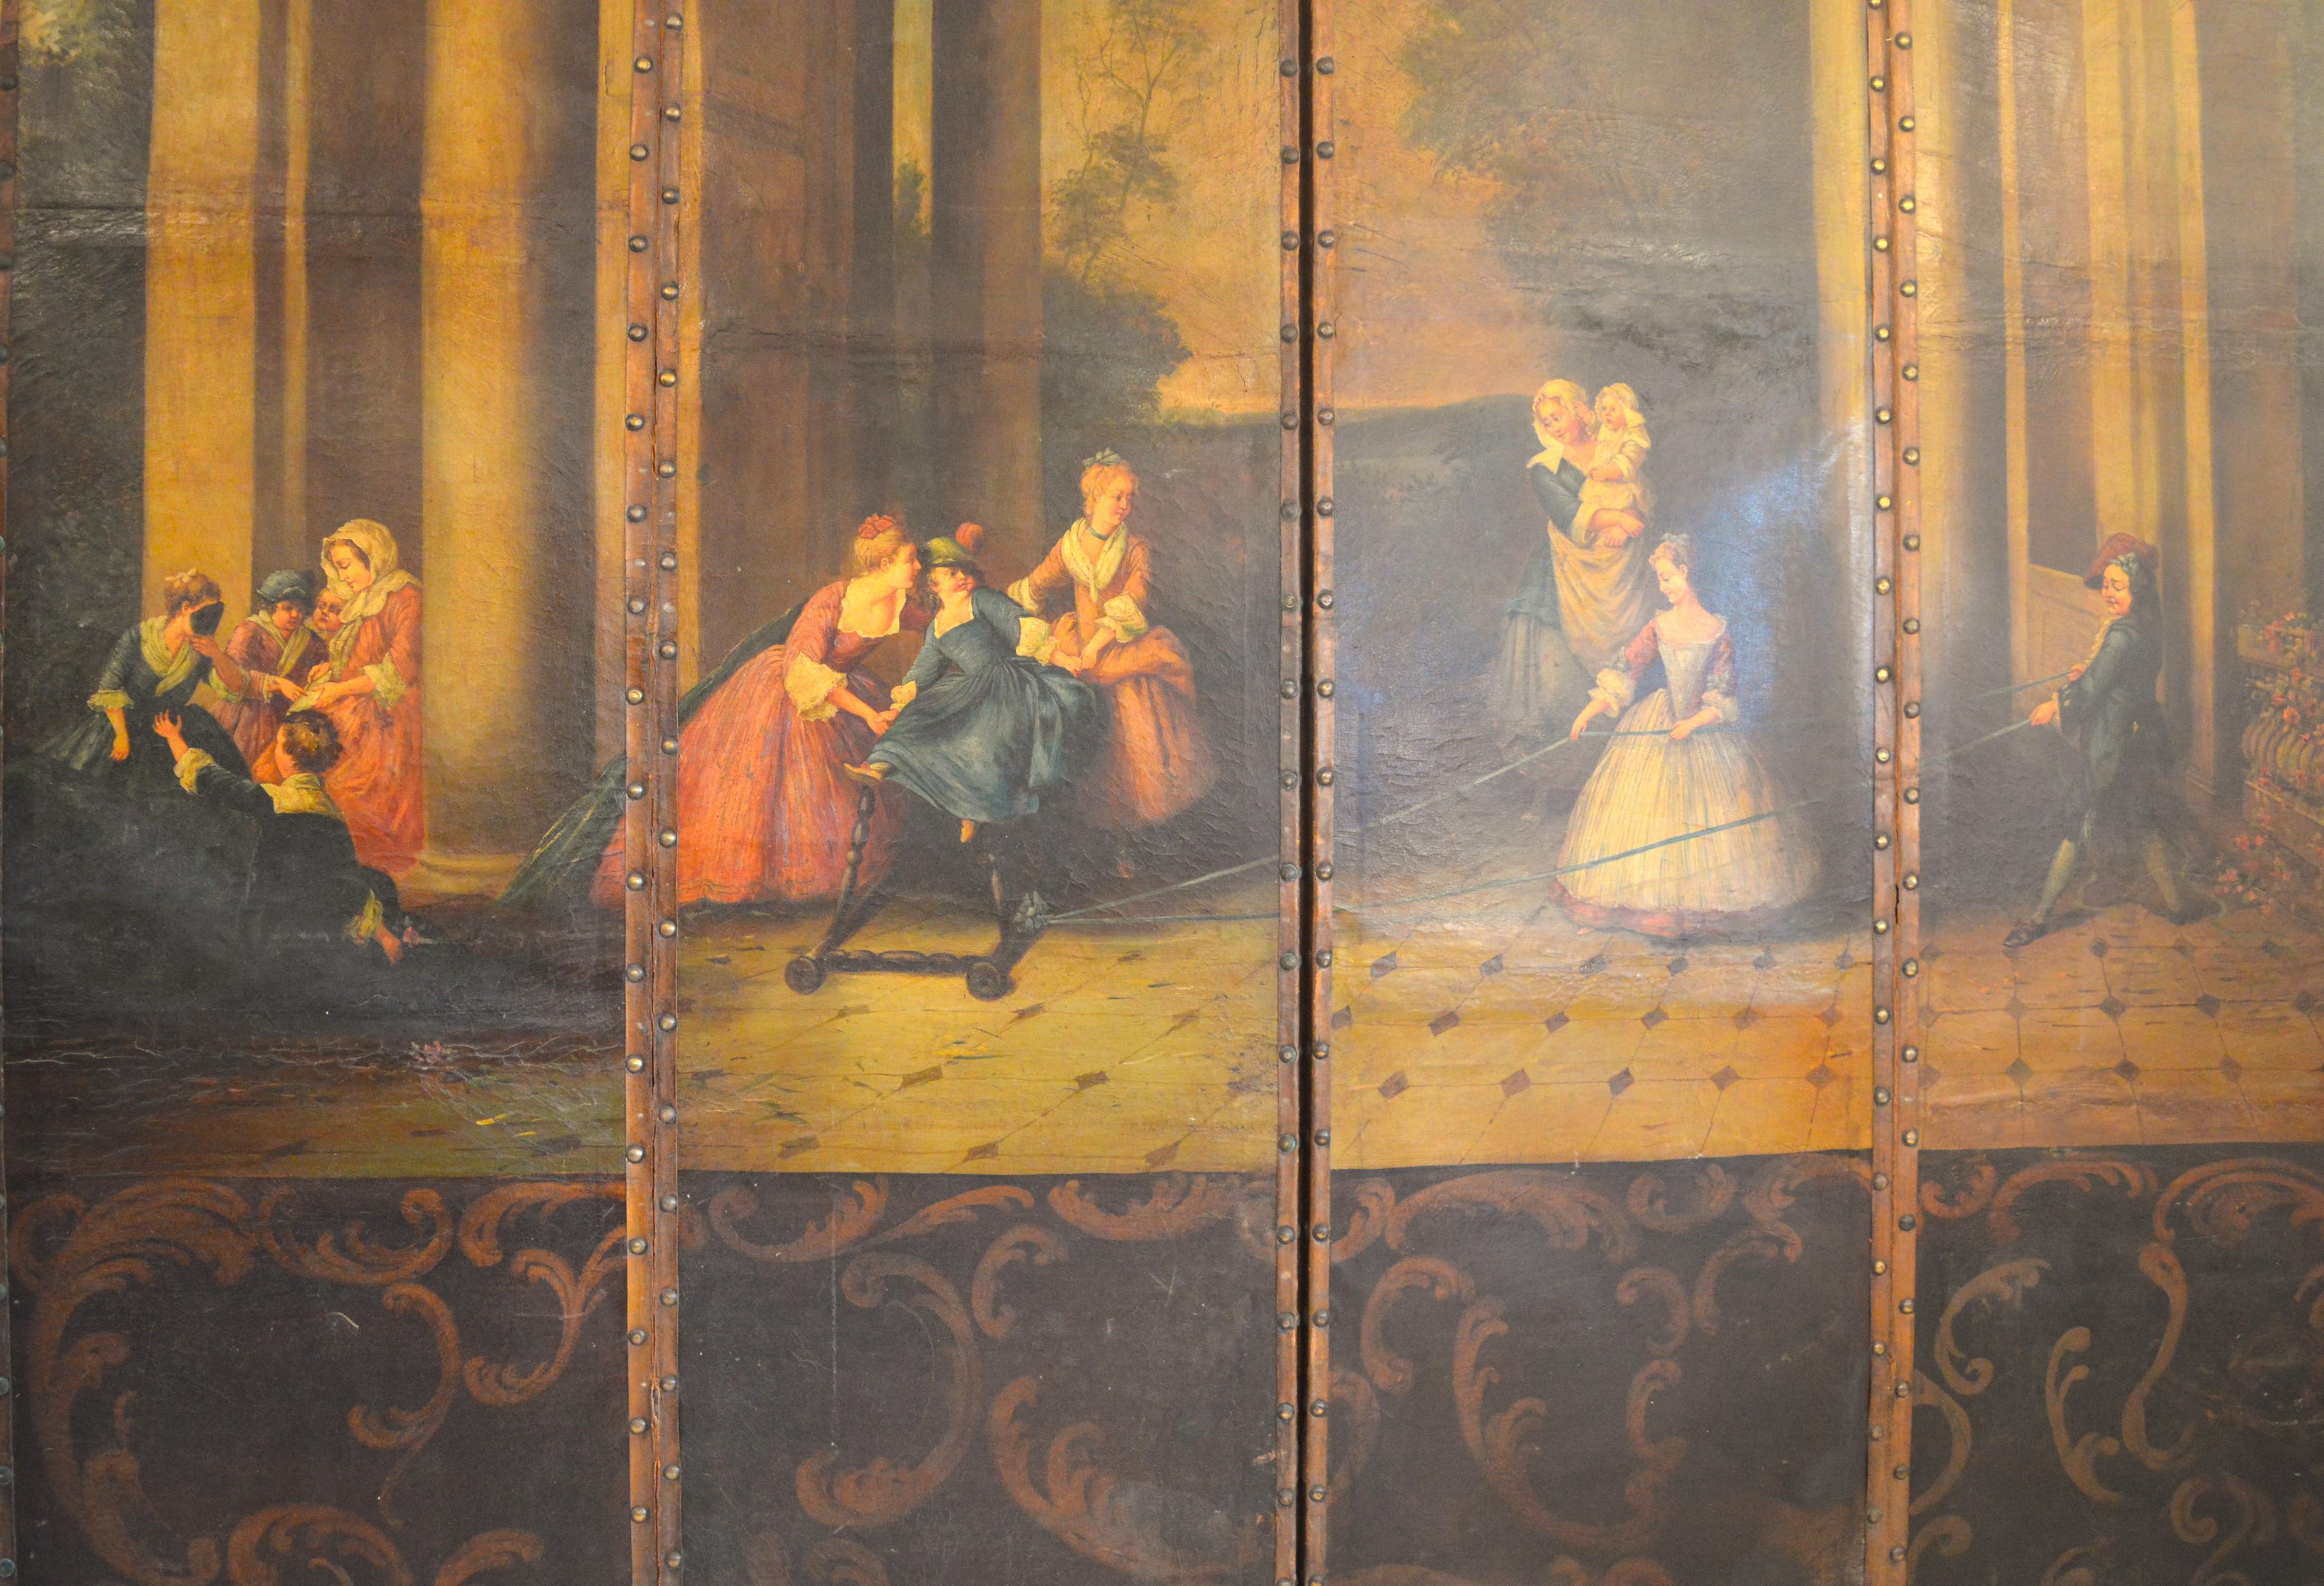 18th century Anglo-Dutch painted leather screen in country house condition. This screen was most likely made in England by Dutch craftsmen who settled in England during the time of William and Mary. The screen is large and could act as a room